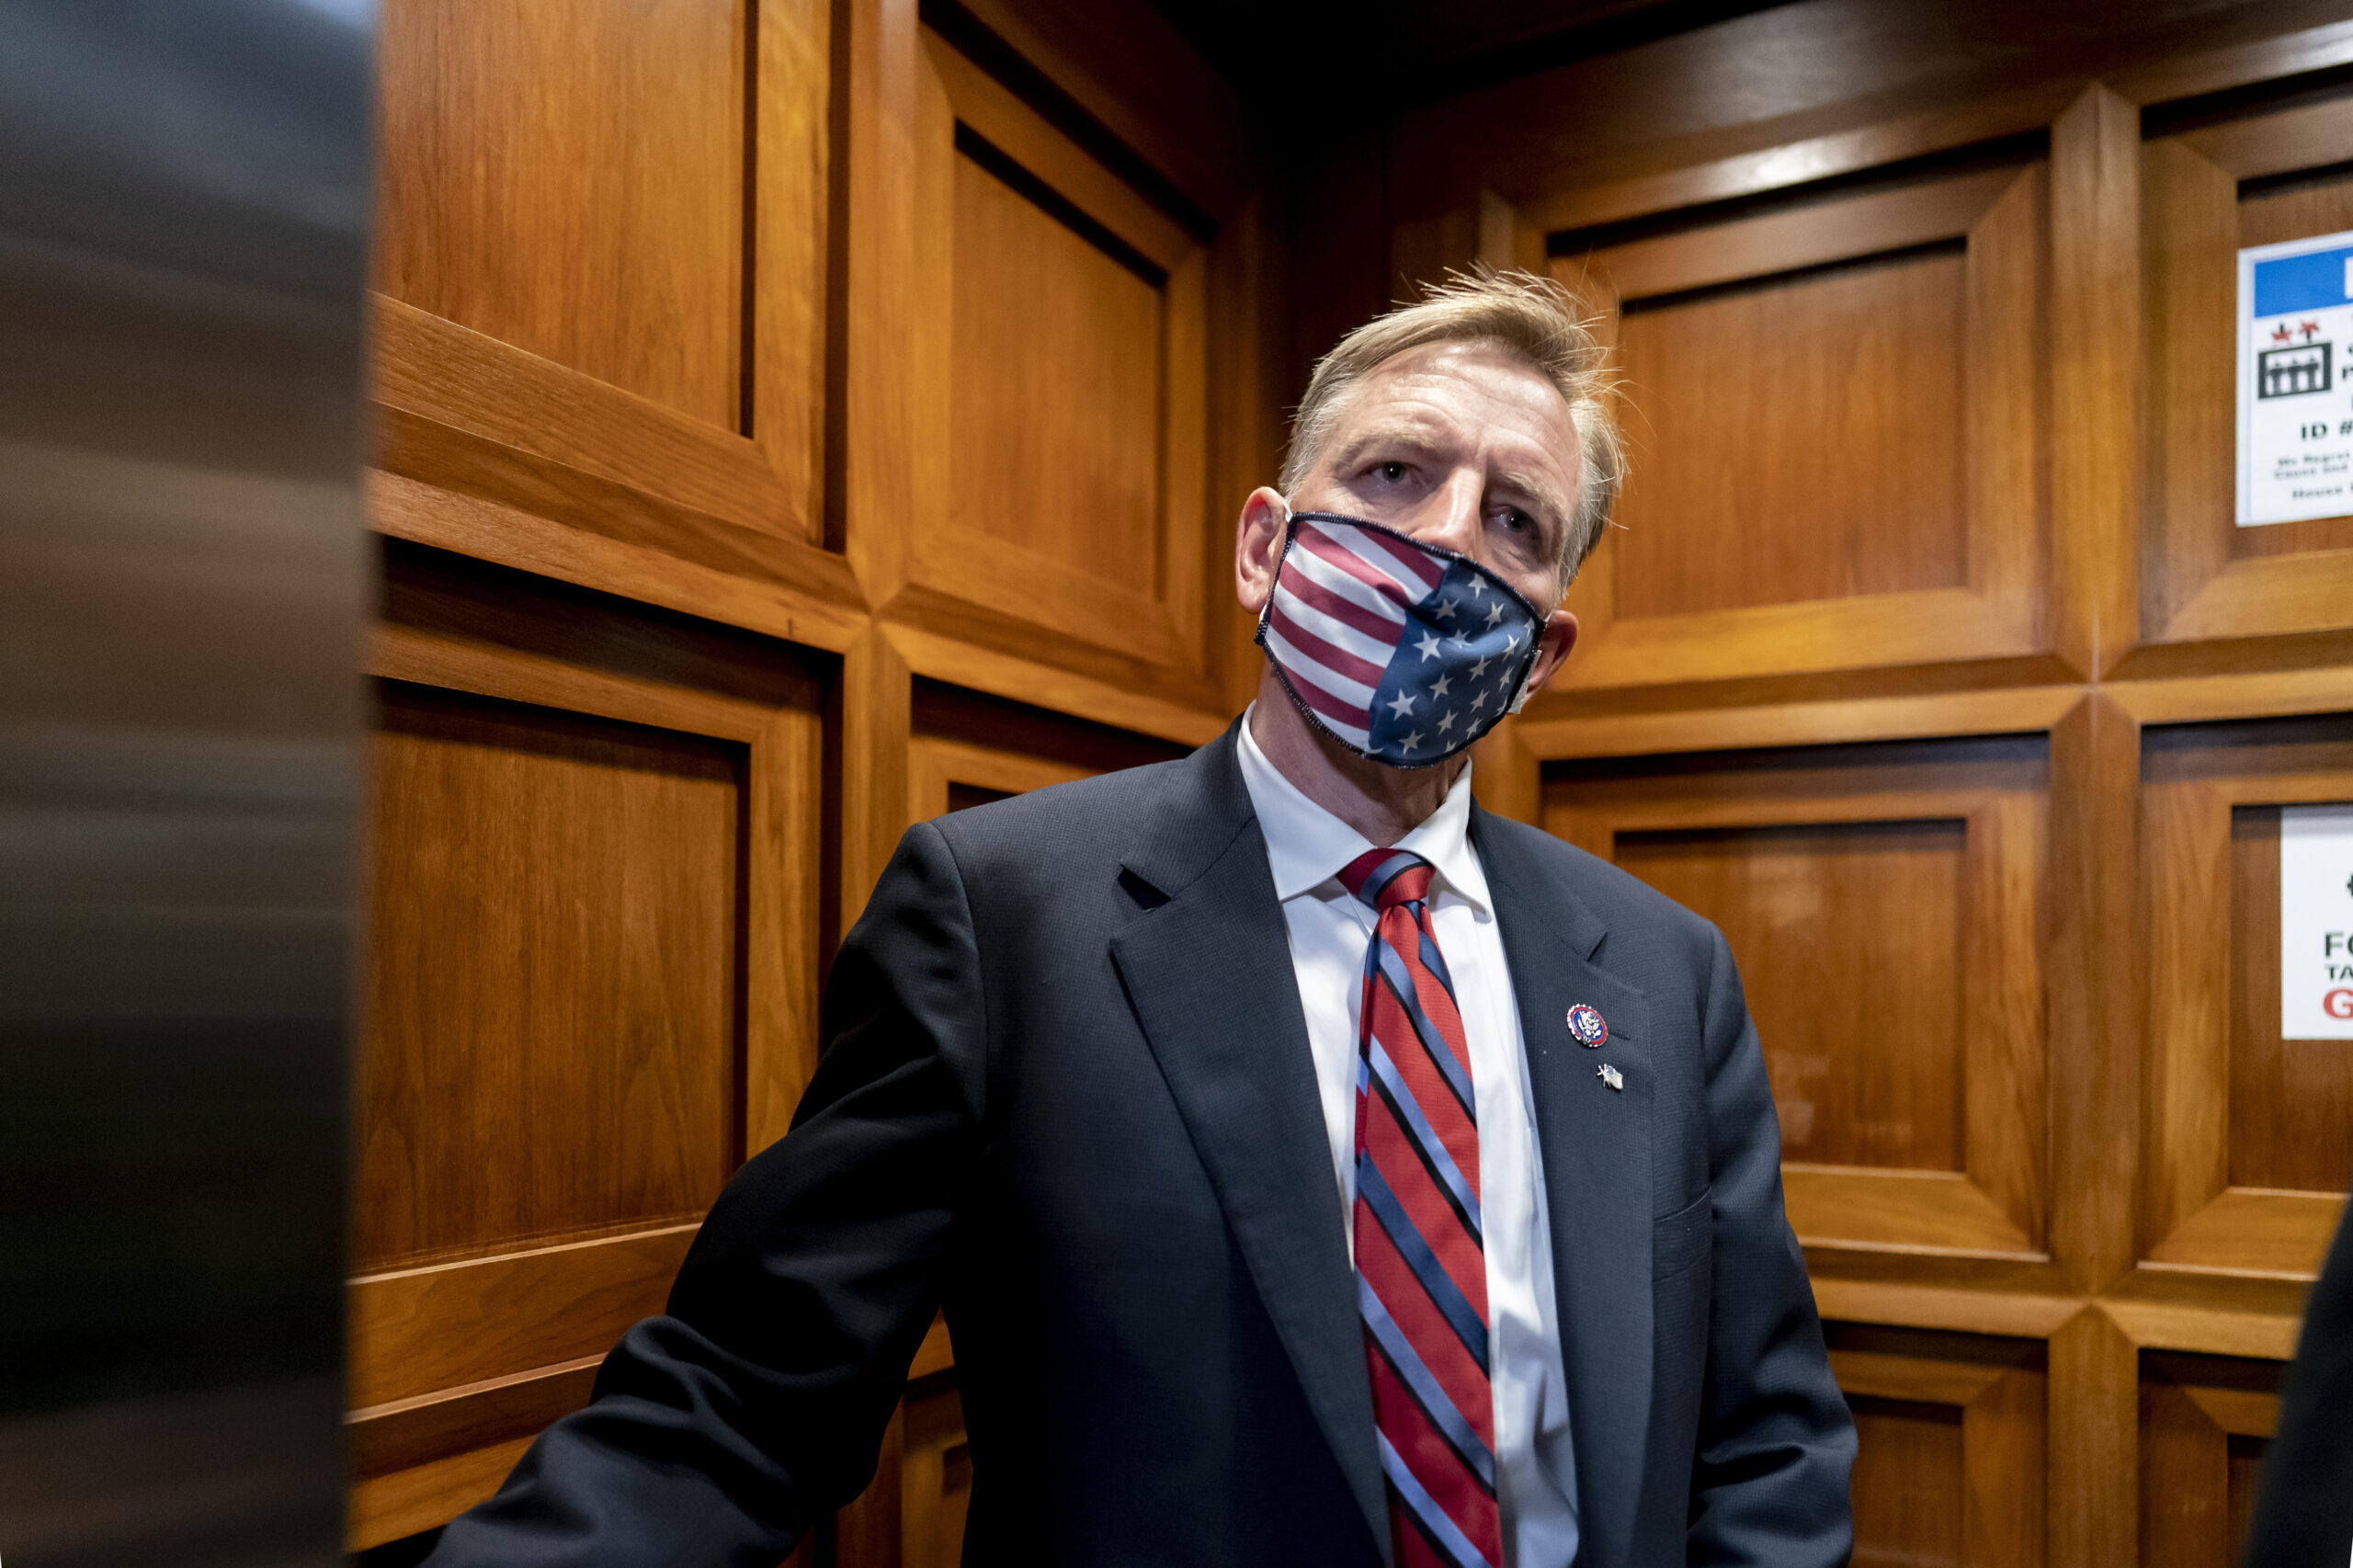 Republican Rep. Paul Gosar of Arizona, takes an elevator as the House of Representatives prepares to vote on a resolution to formally rebuke him for tweeting an animated video that depicted him striking Rep. Alexandria Ocasio-Cortez, D-N.Y., with a sword, on Capitol Hill in Washington, Wednesday, Nov. 17, 2021. In addition to the official censure, House Democrats want to oust him from his seats on the House Oversight Committee and the Natural Resources Committee. (AP Photo/J. Scott Applewhite)